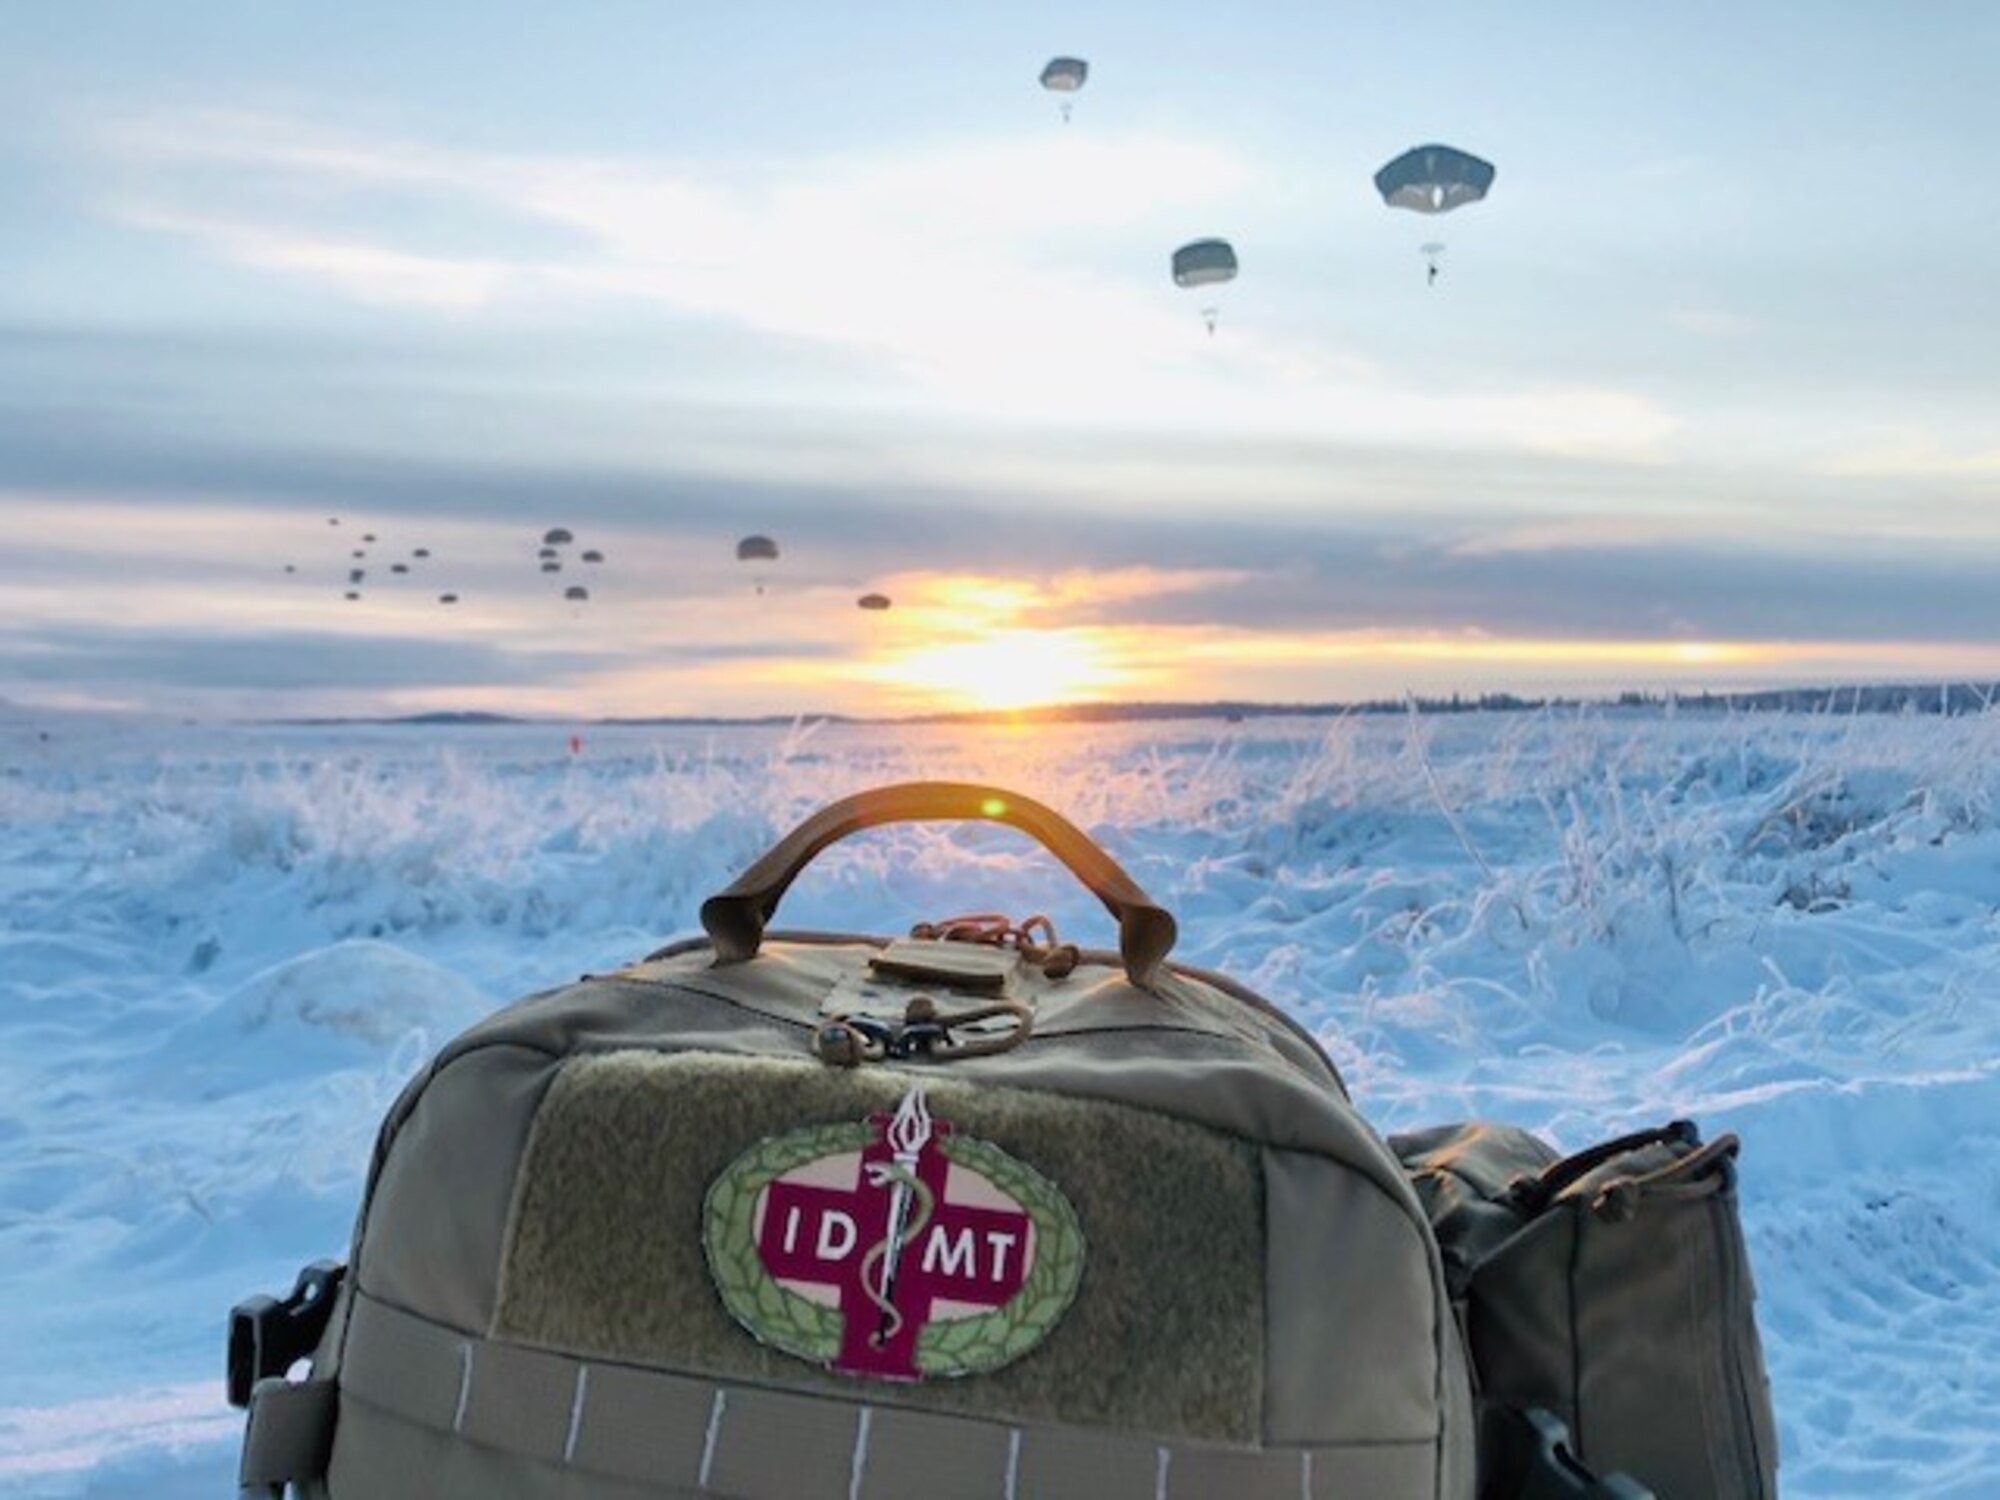 An independent duty medical technician’s medical kit is readily available on the Malamute Drop Zone, Dec. 4, 2020 at Joint Base Elmendorf-Richardson, Alaska. IDMTs work as an extension of physicians and treat various minor injuries for pilots and other personnel.